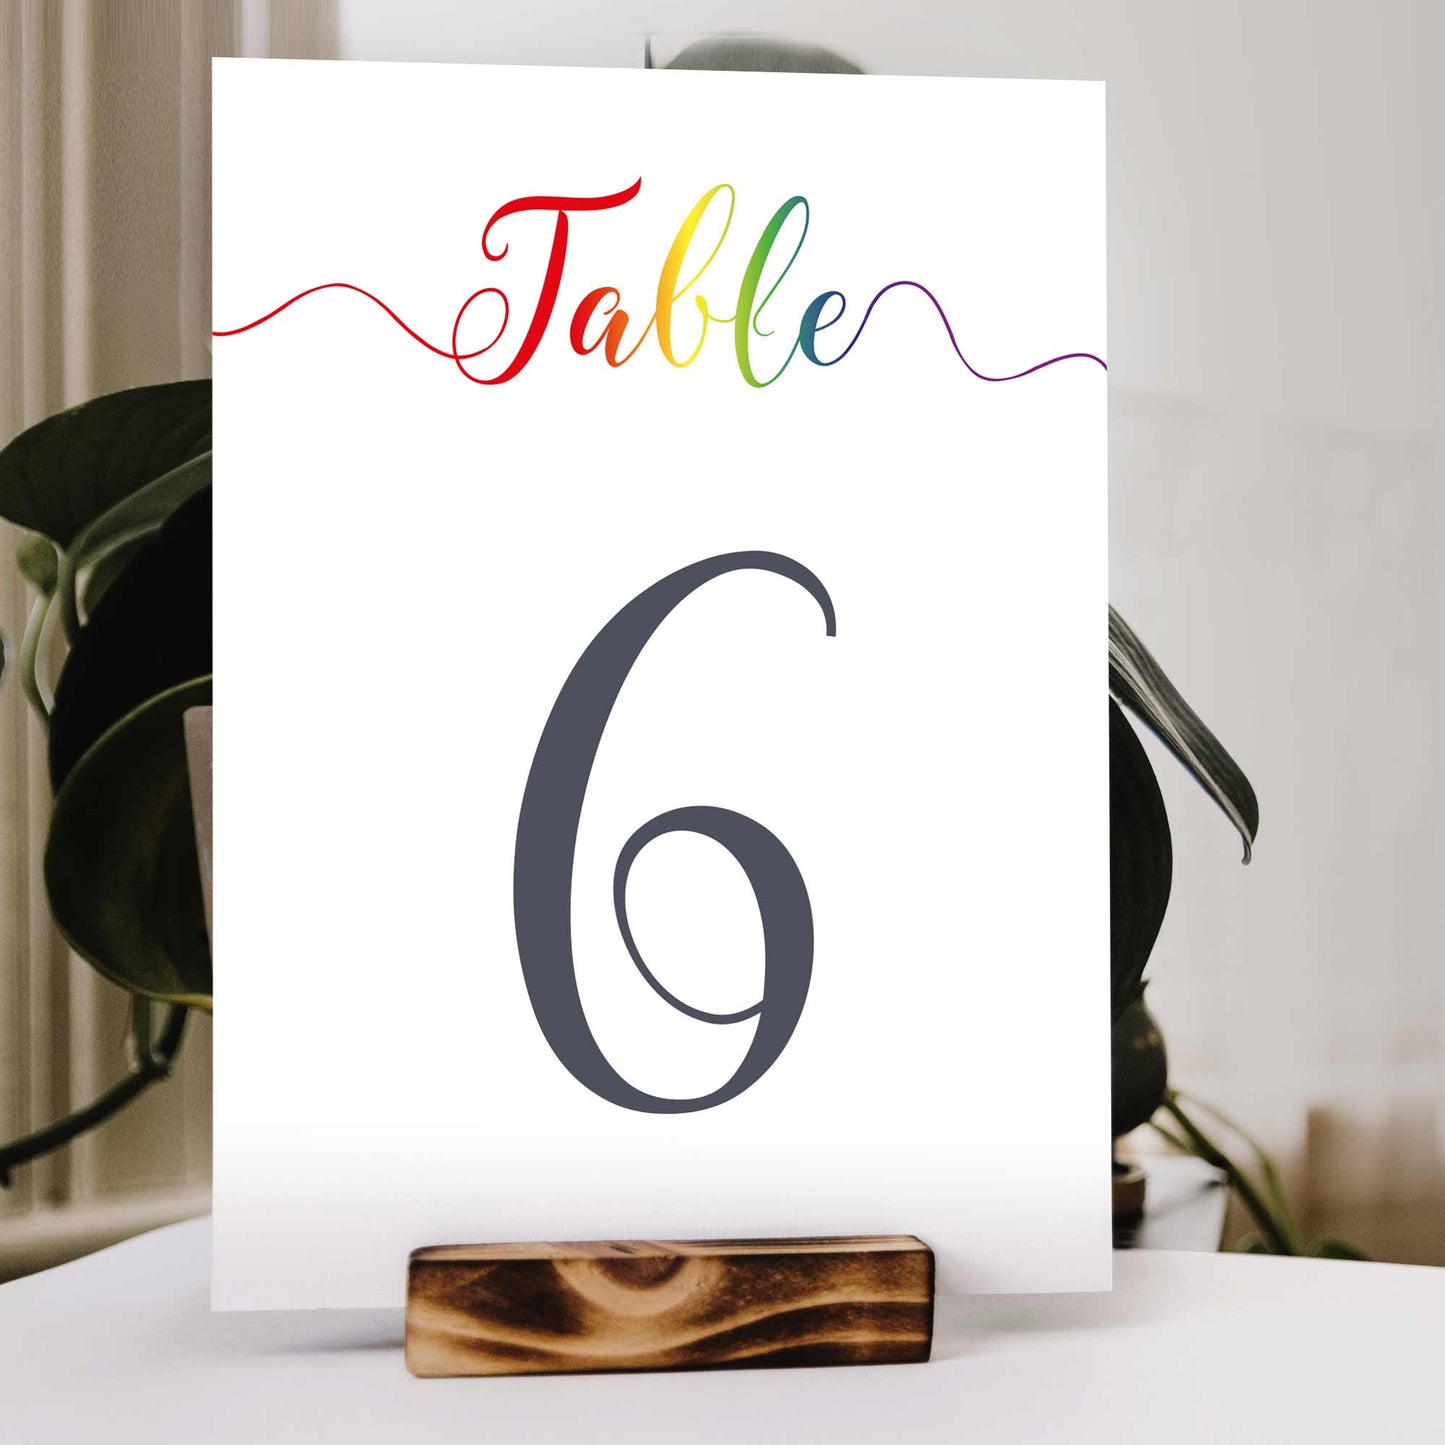 printable rainbow table numbers in a wooden stand